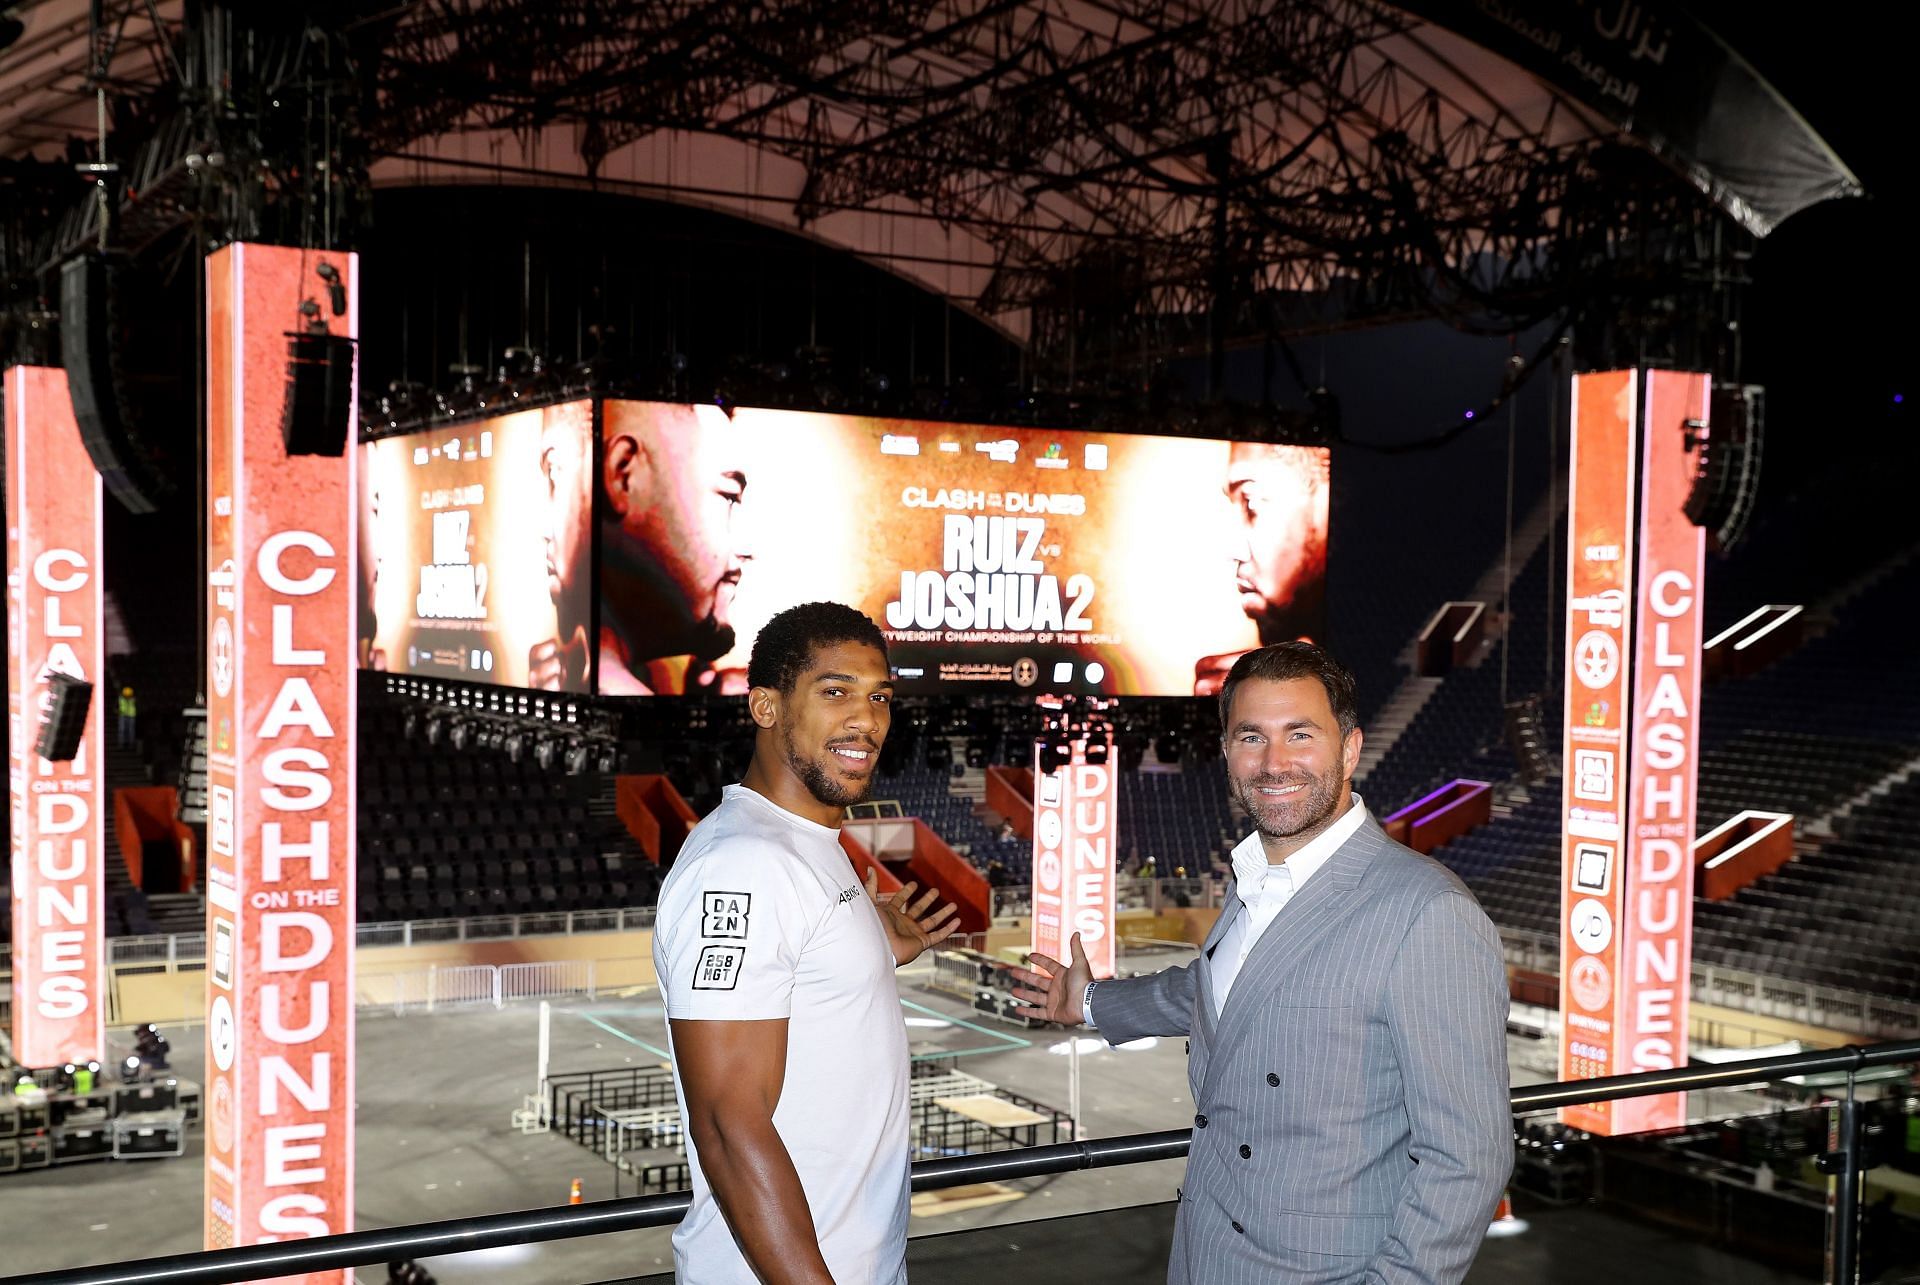 Anthony Joshua (left) and Eddie Hearn (right) - Image via Getty Images